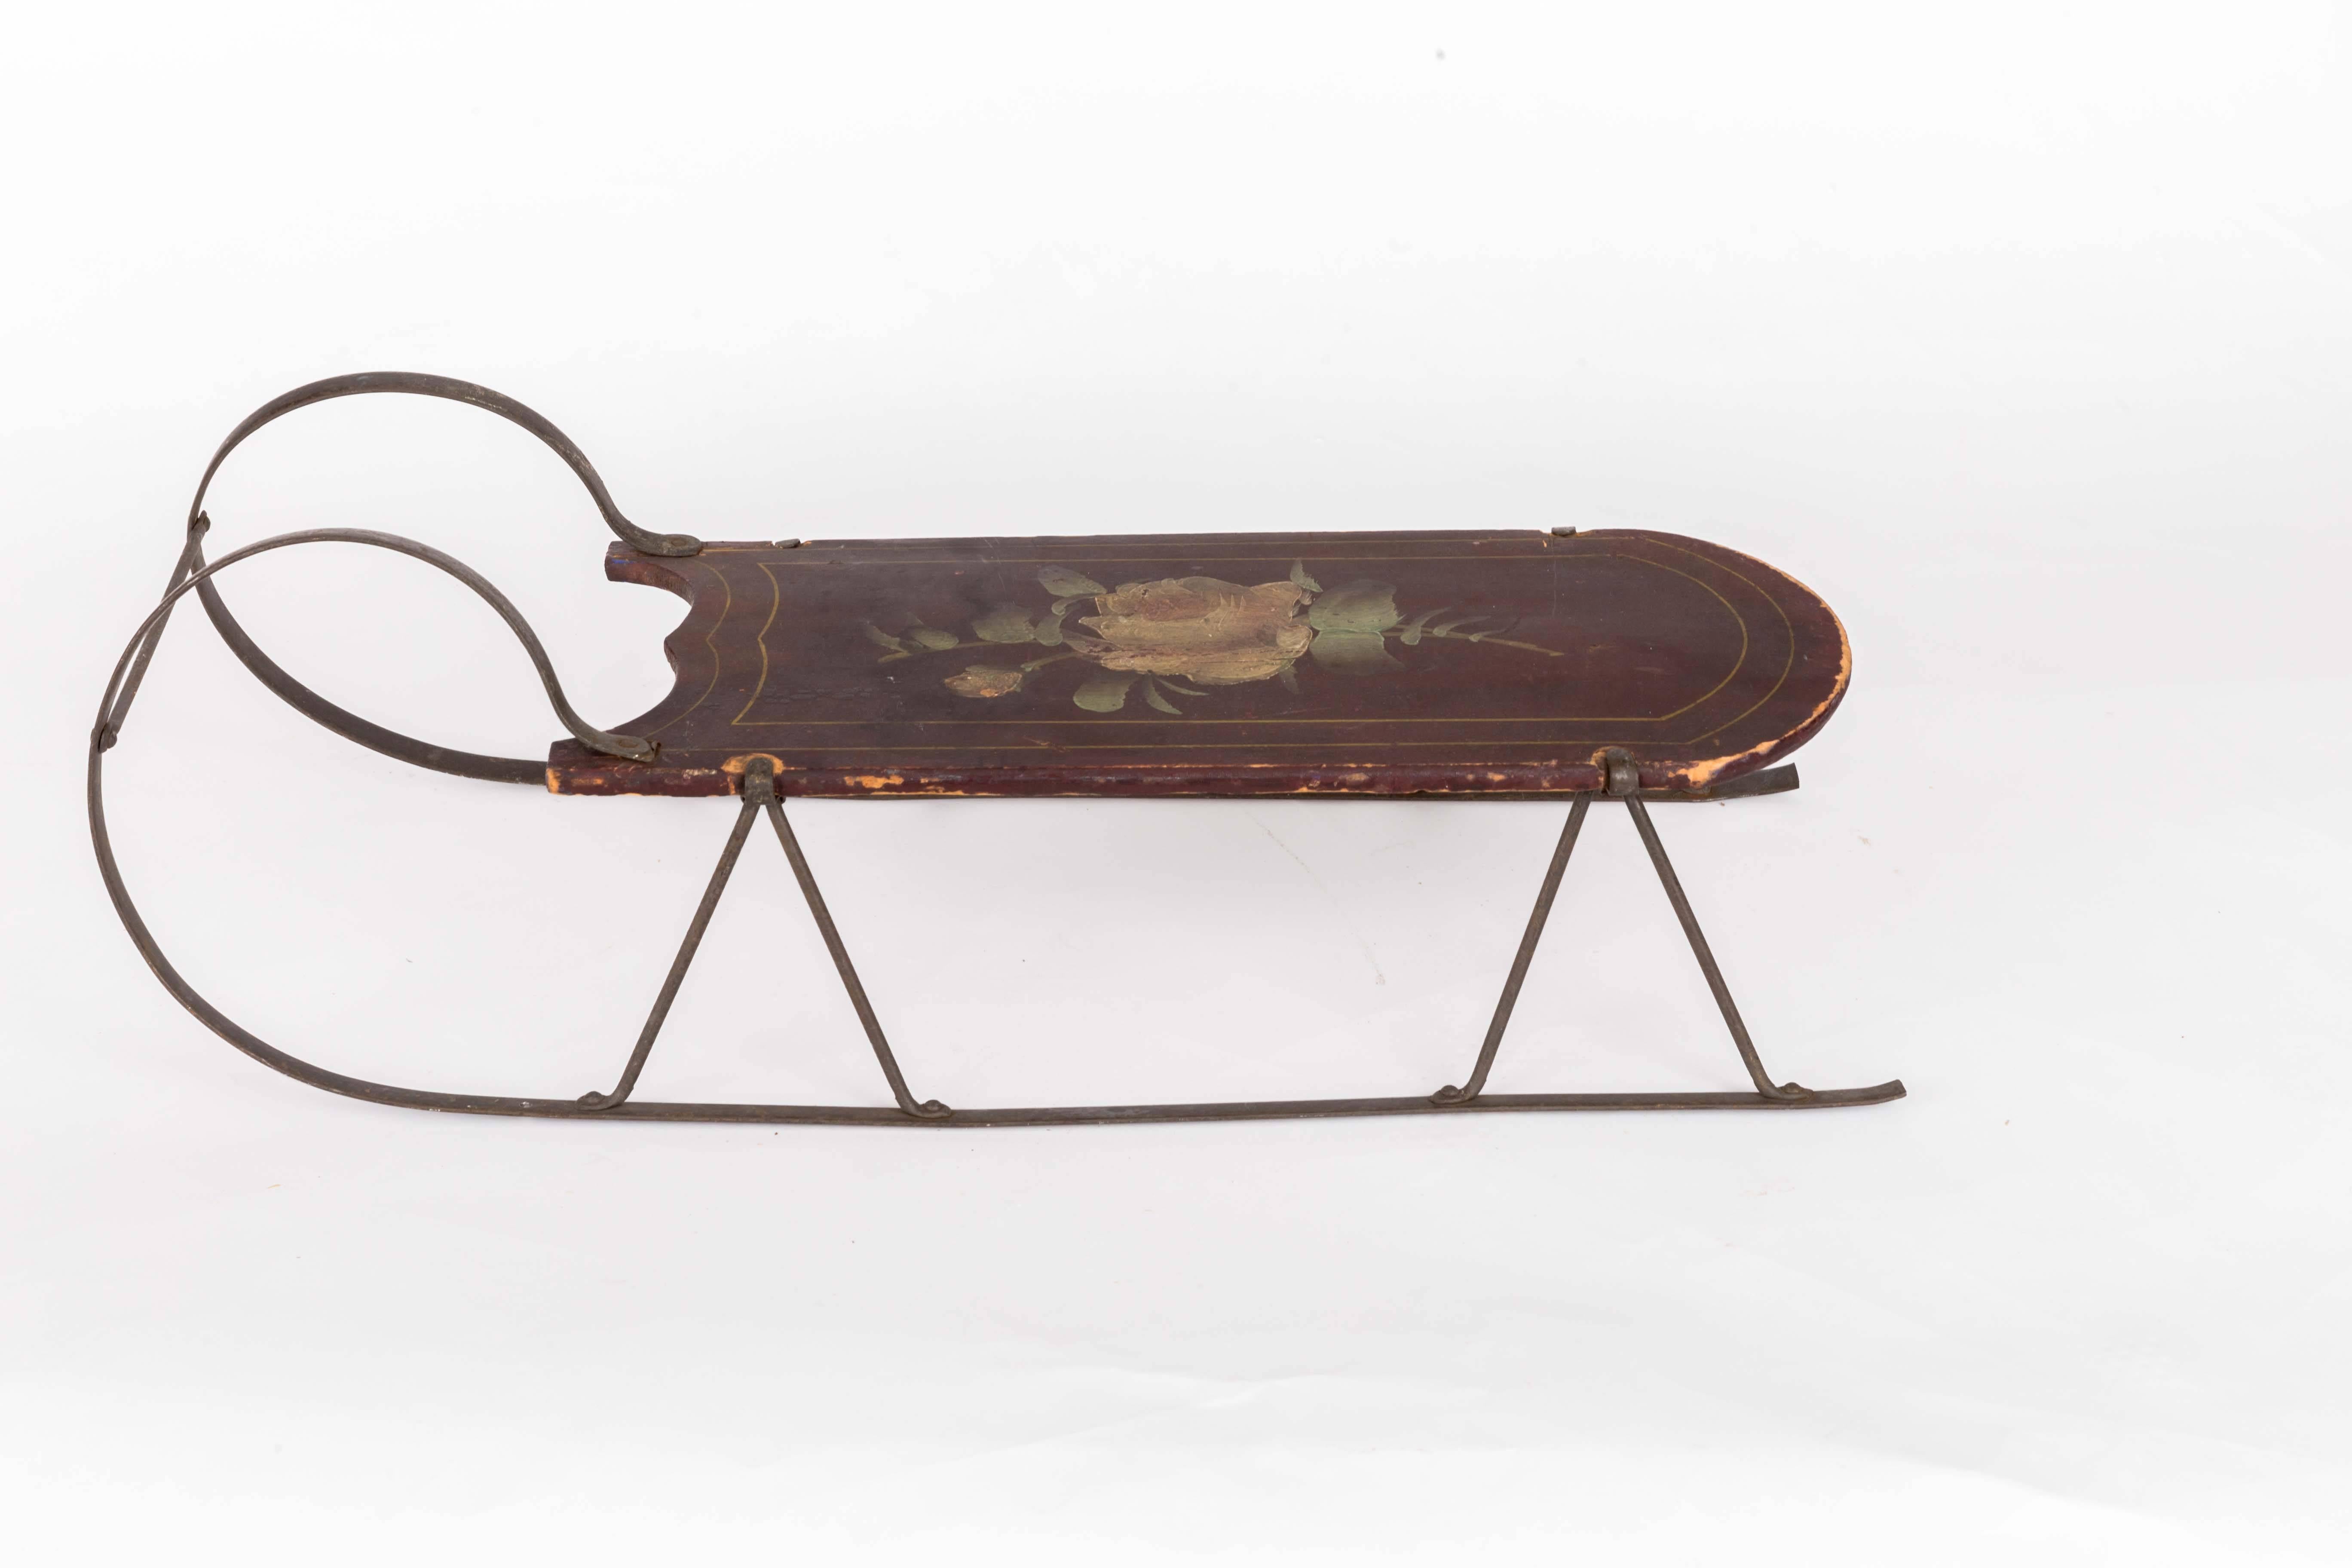 Painted 19th-Century Petite Childs Sled